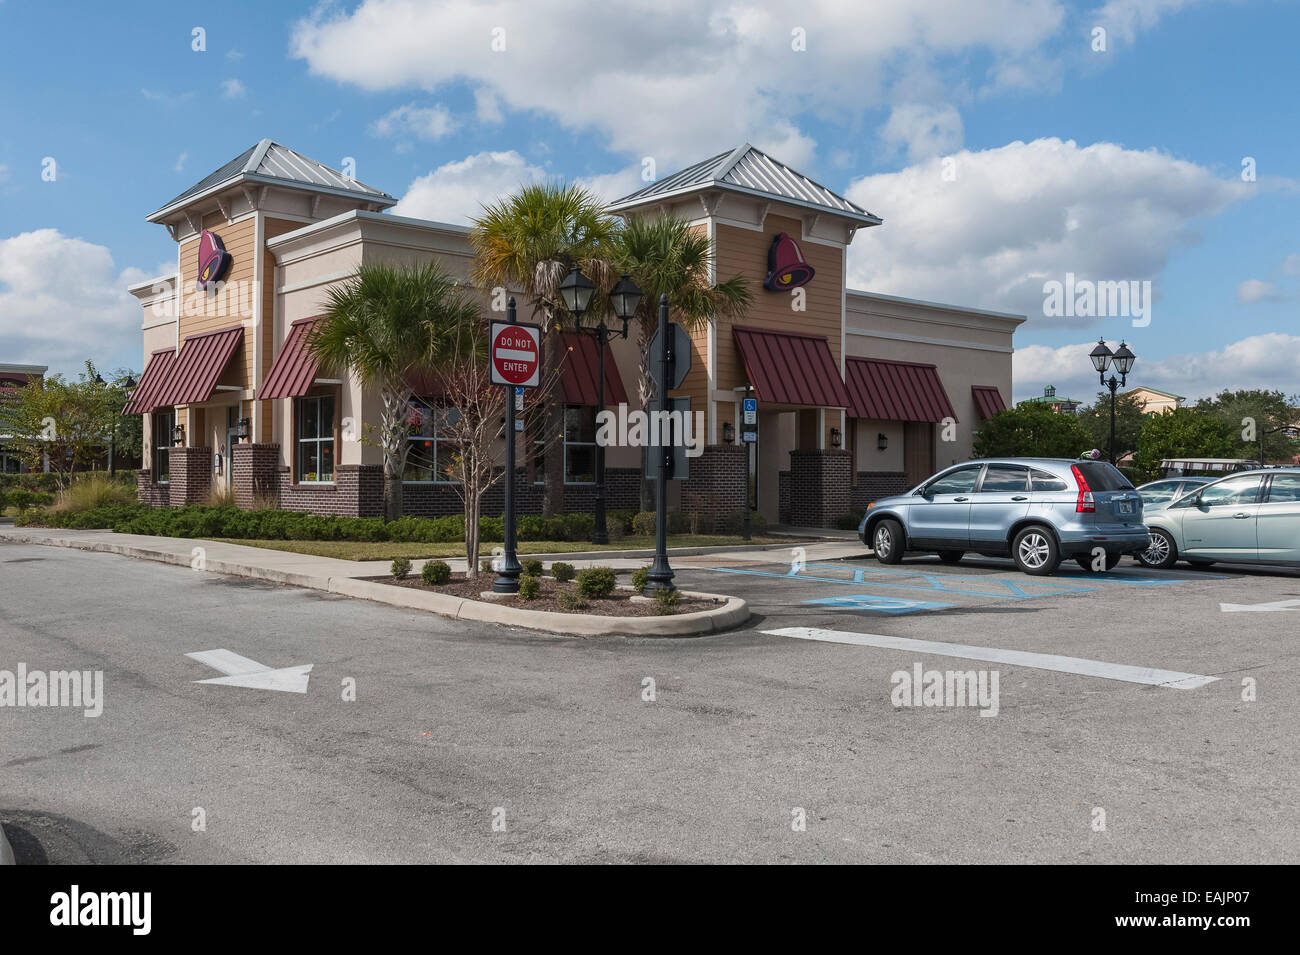 Taco Bell Restaurant Storefront Building located in The Villages central Florida USA Stock Photo